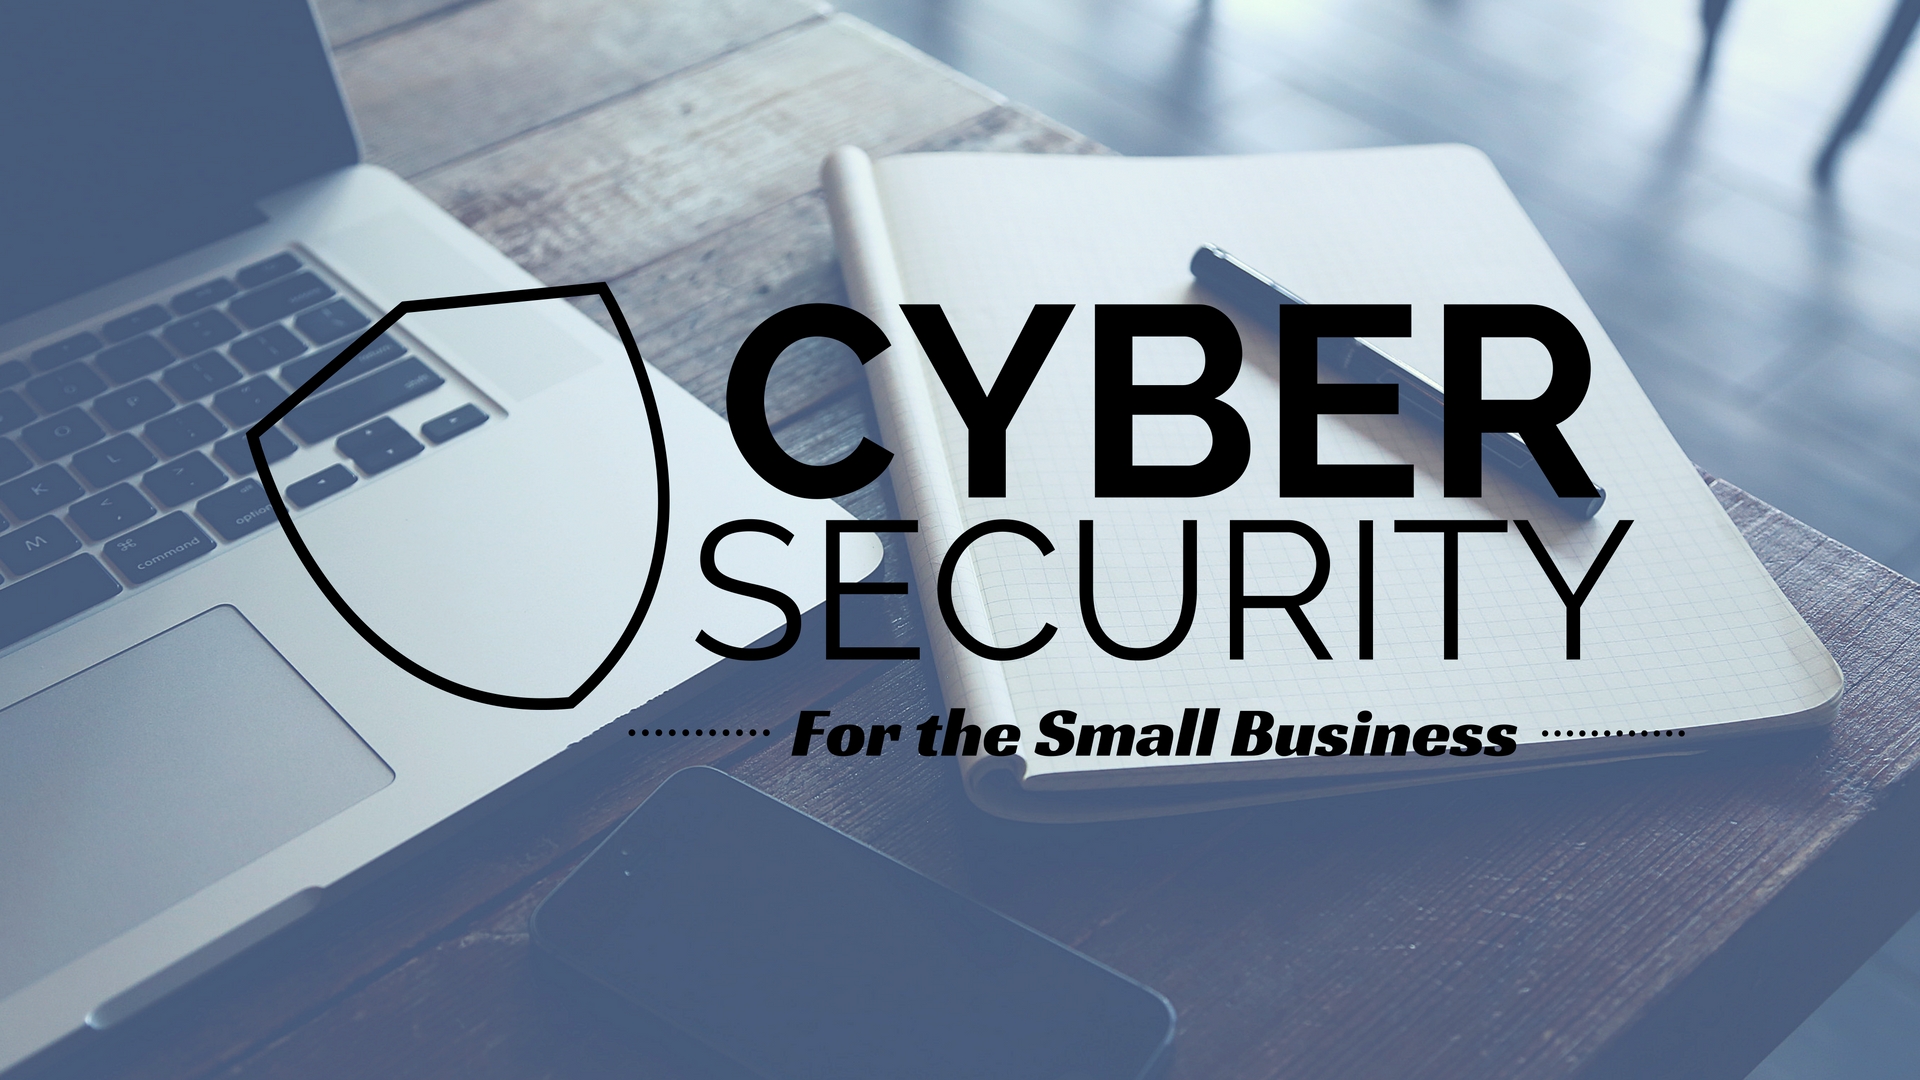 small business cyber security guide